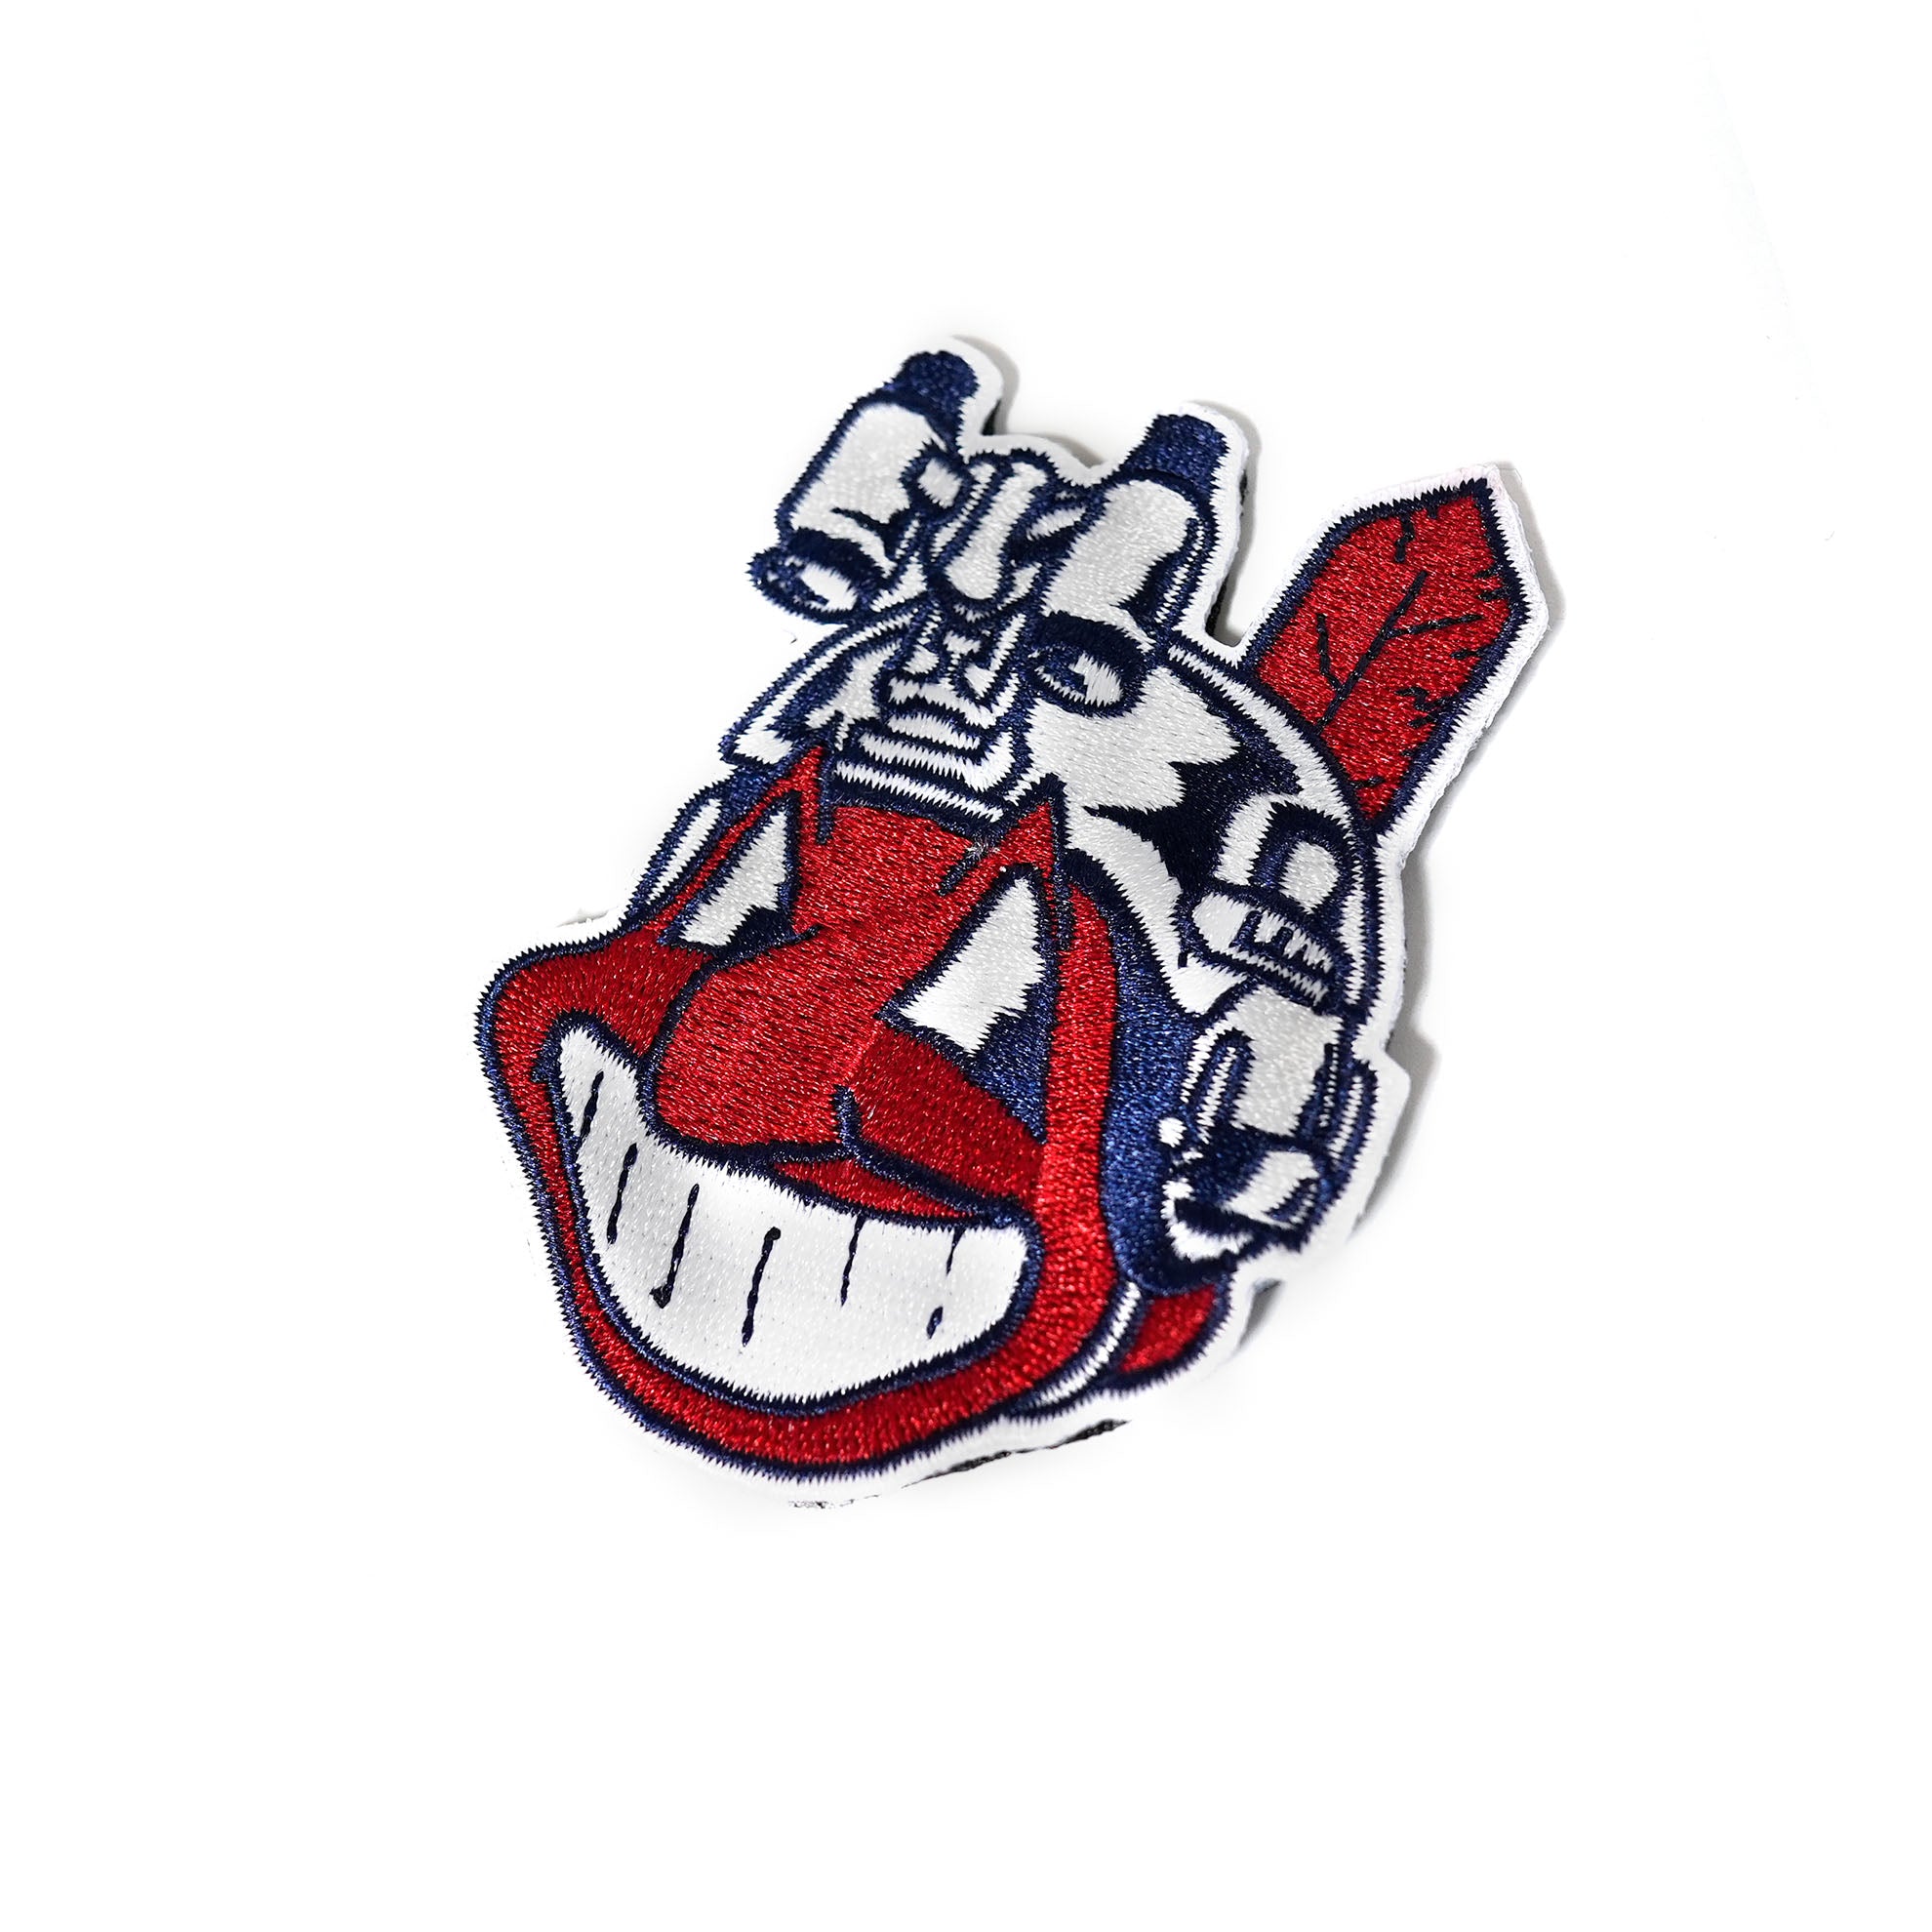 SupDef Chief Wahoo Patch